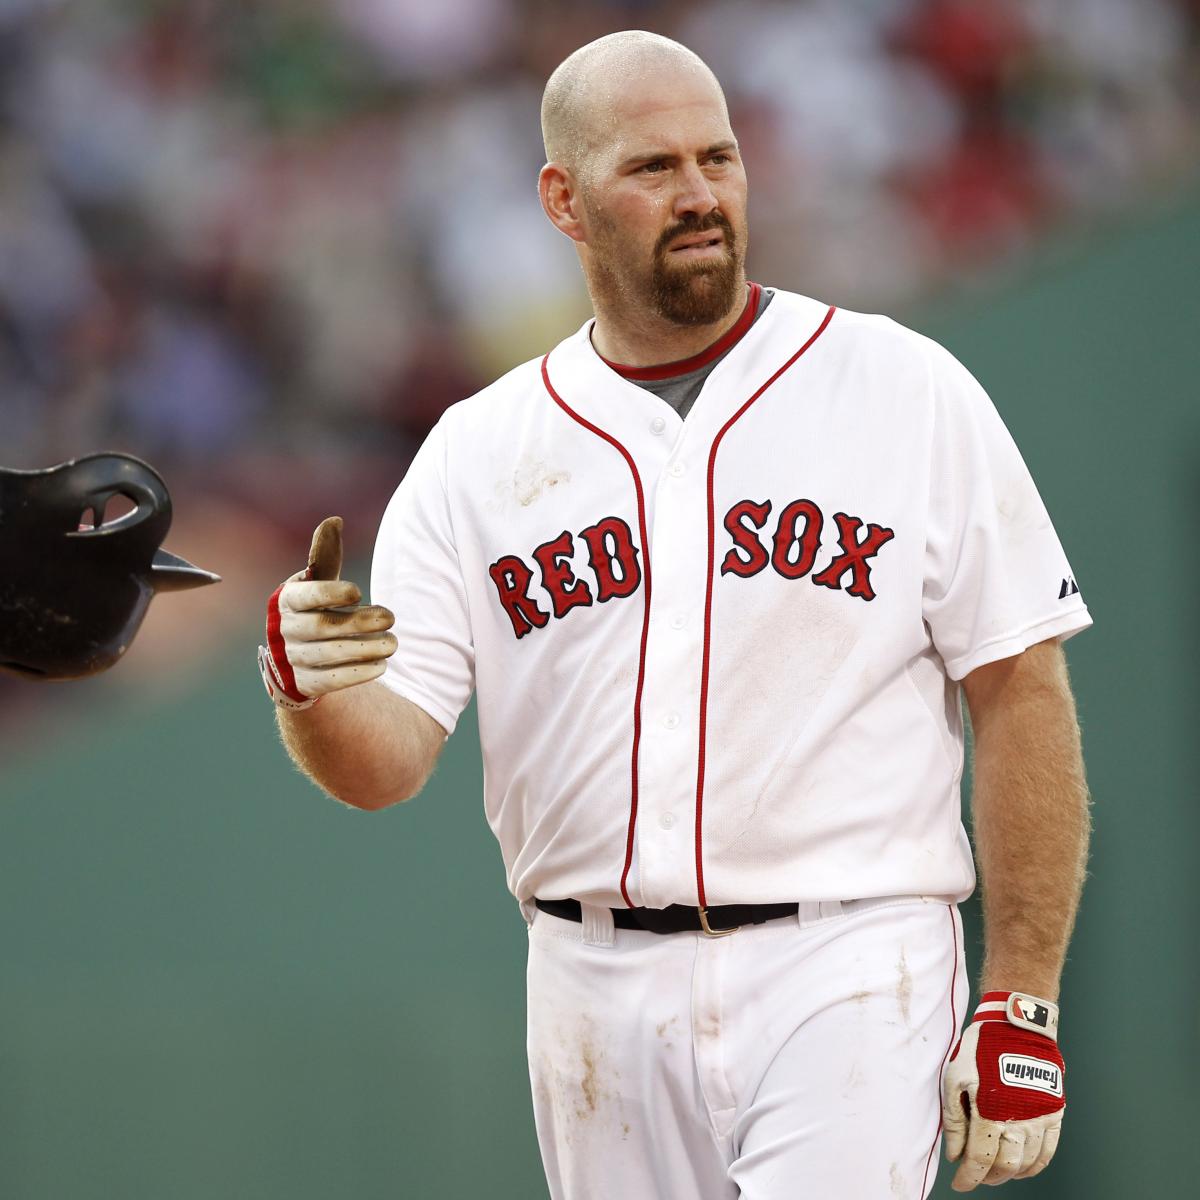 Kevin Youkilis says farewell to Red Sox fans after Chicago trade, MLB